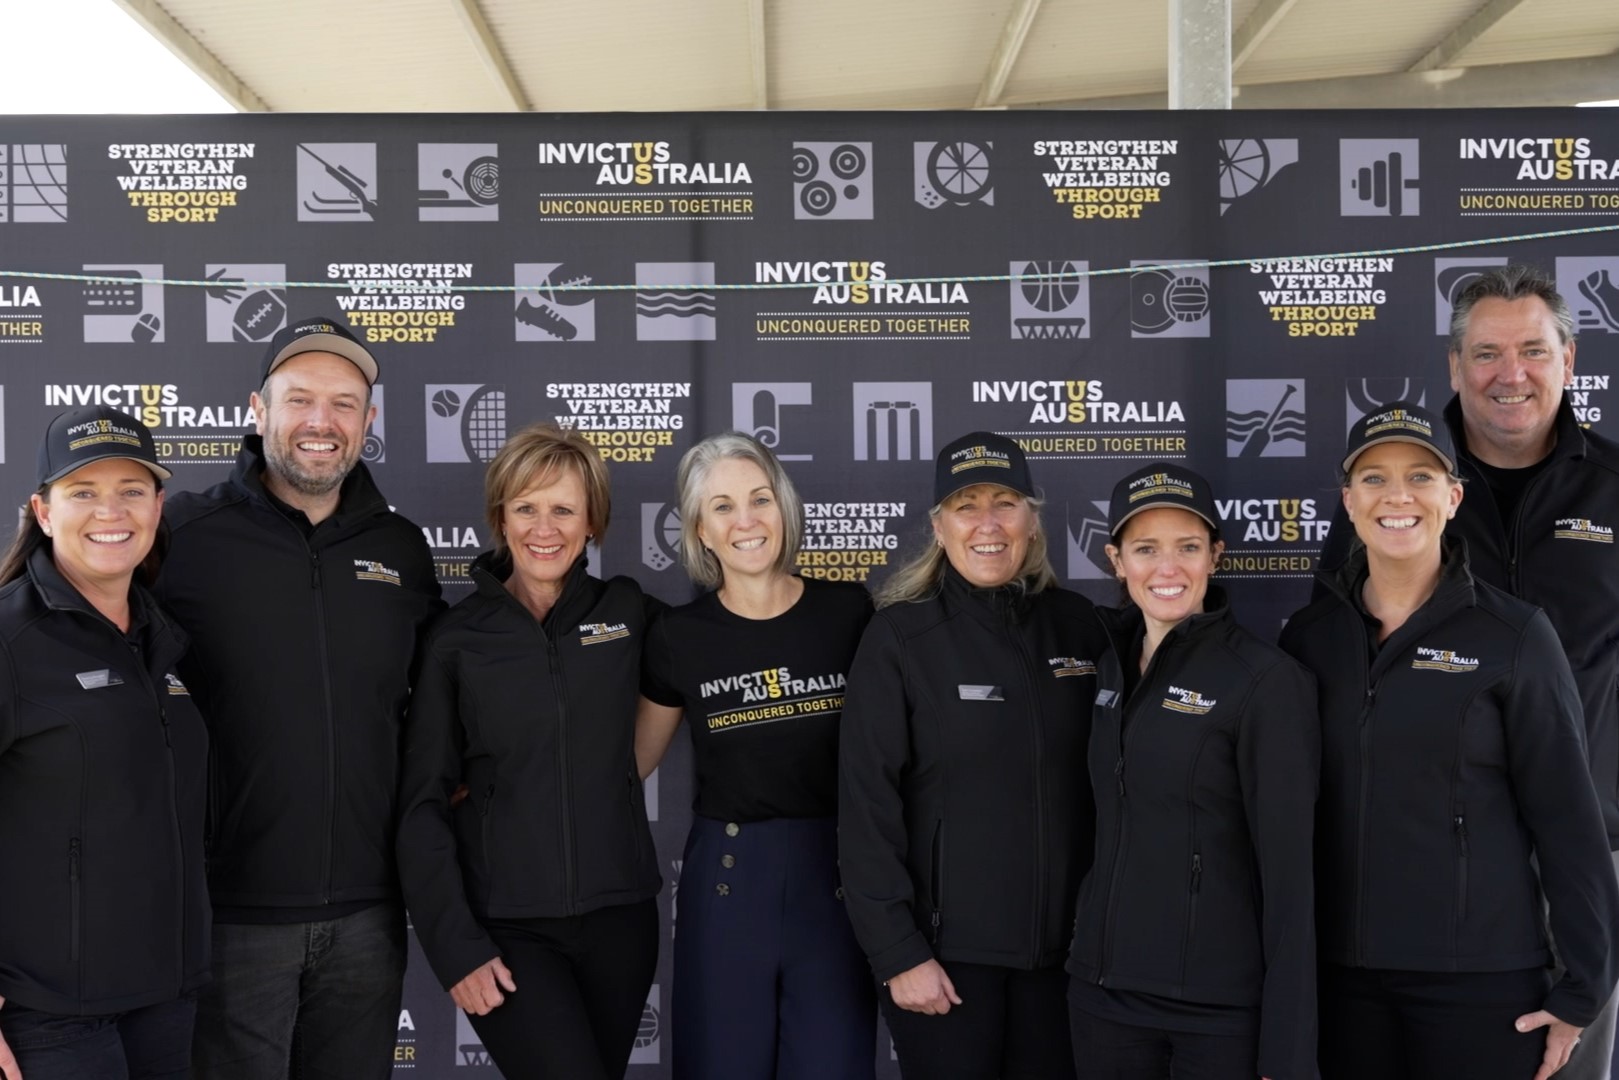 Invictus Australia CEO, Michael Hartung OAM (second from left) implores everyone in the sport sector to take responsibility for supporting the volunteer pathway